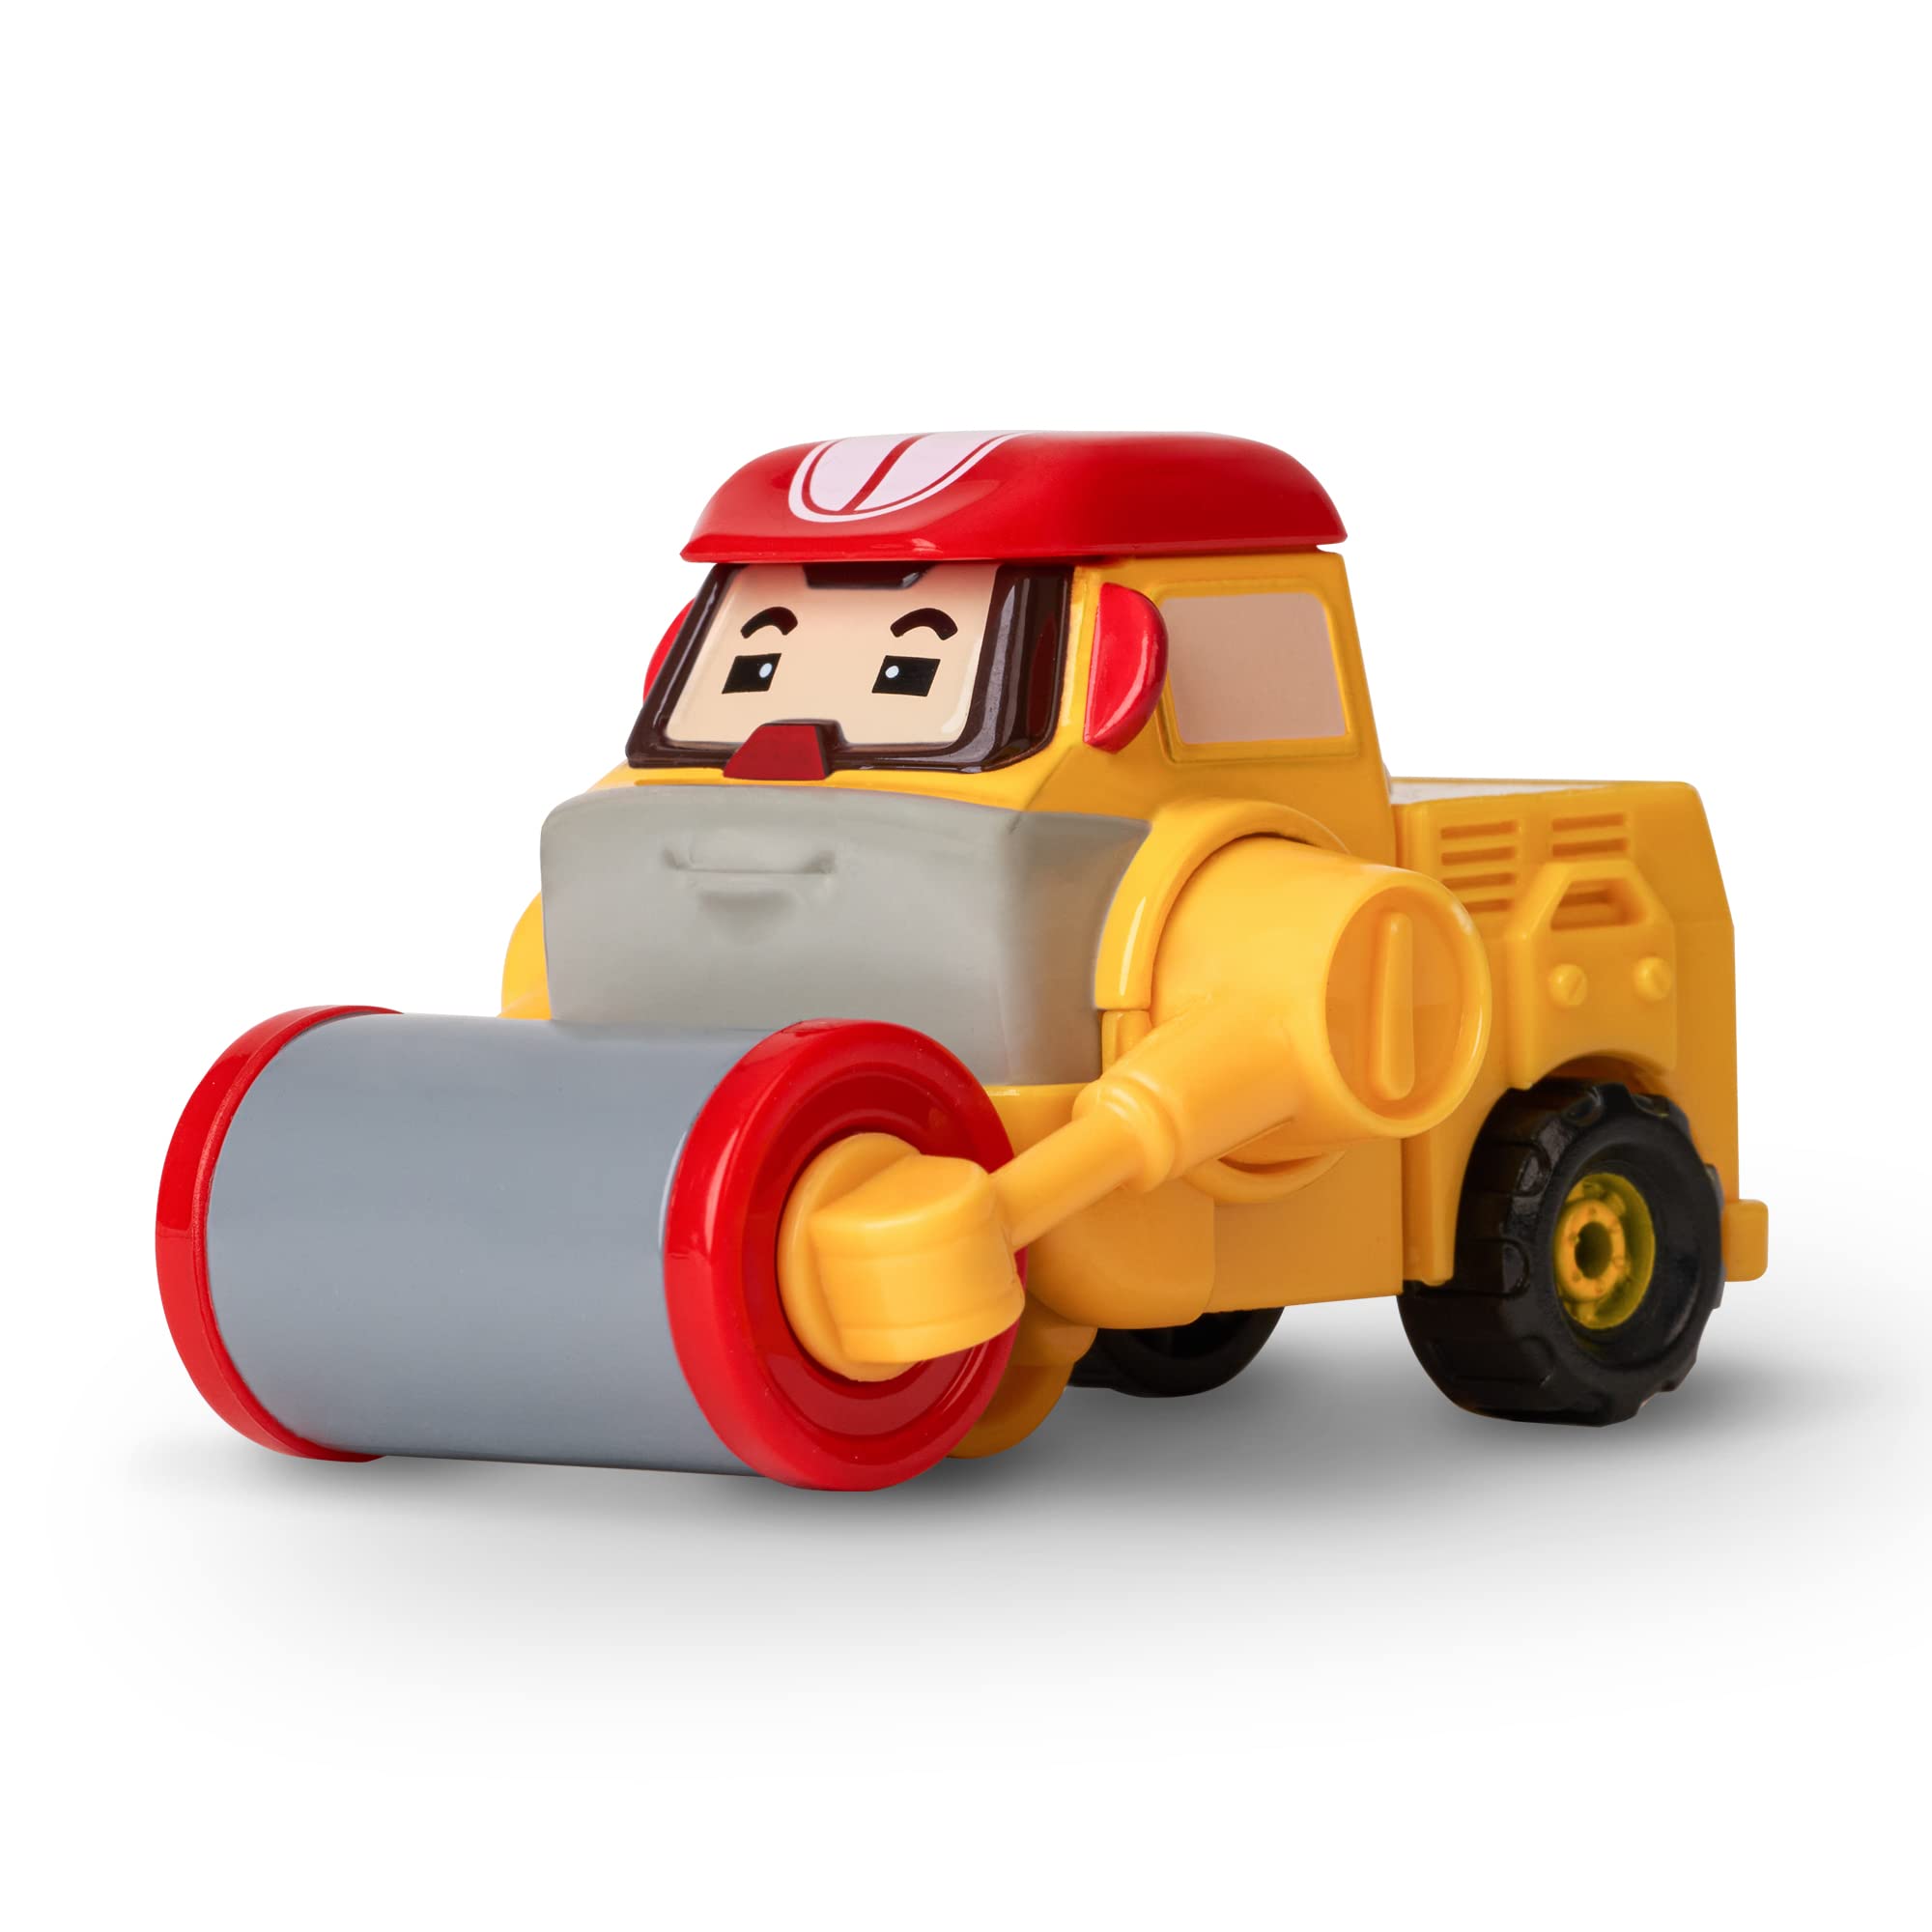 Ask Yourself This: Will Robocar Poli Toys Delight Your Kids This Year